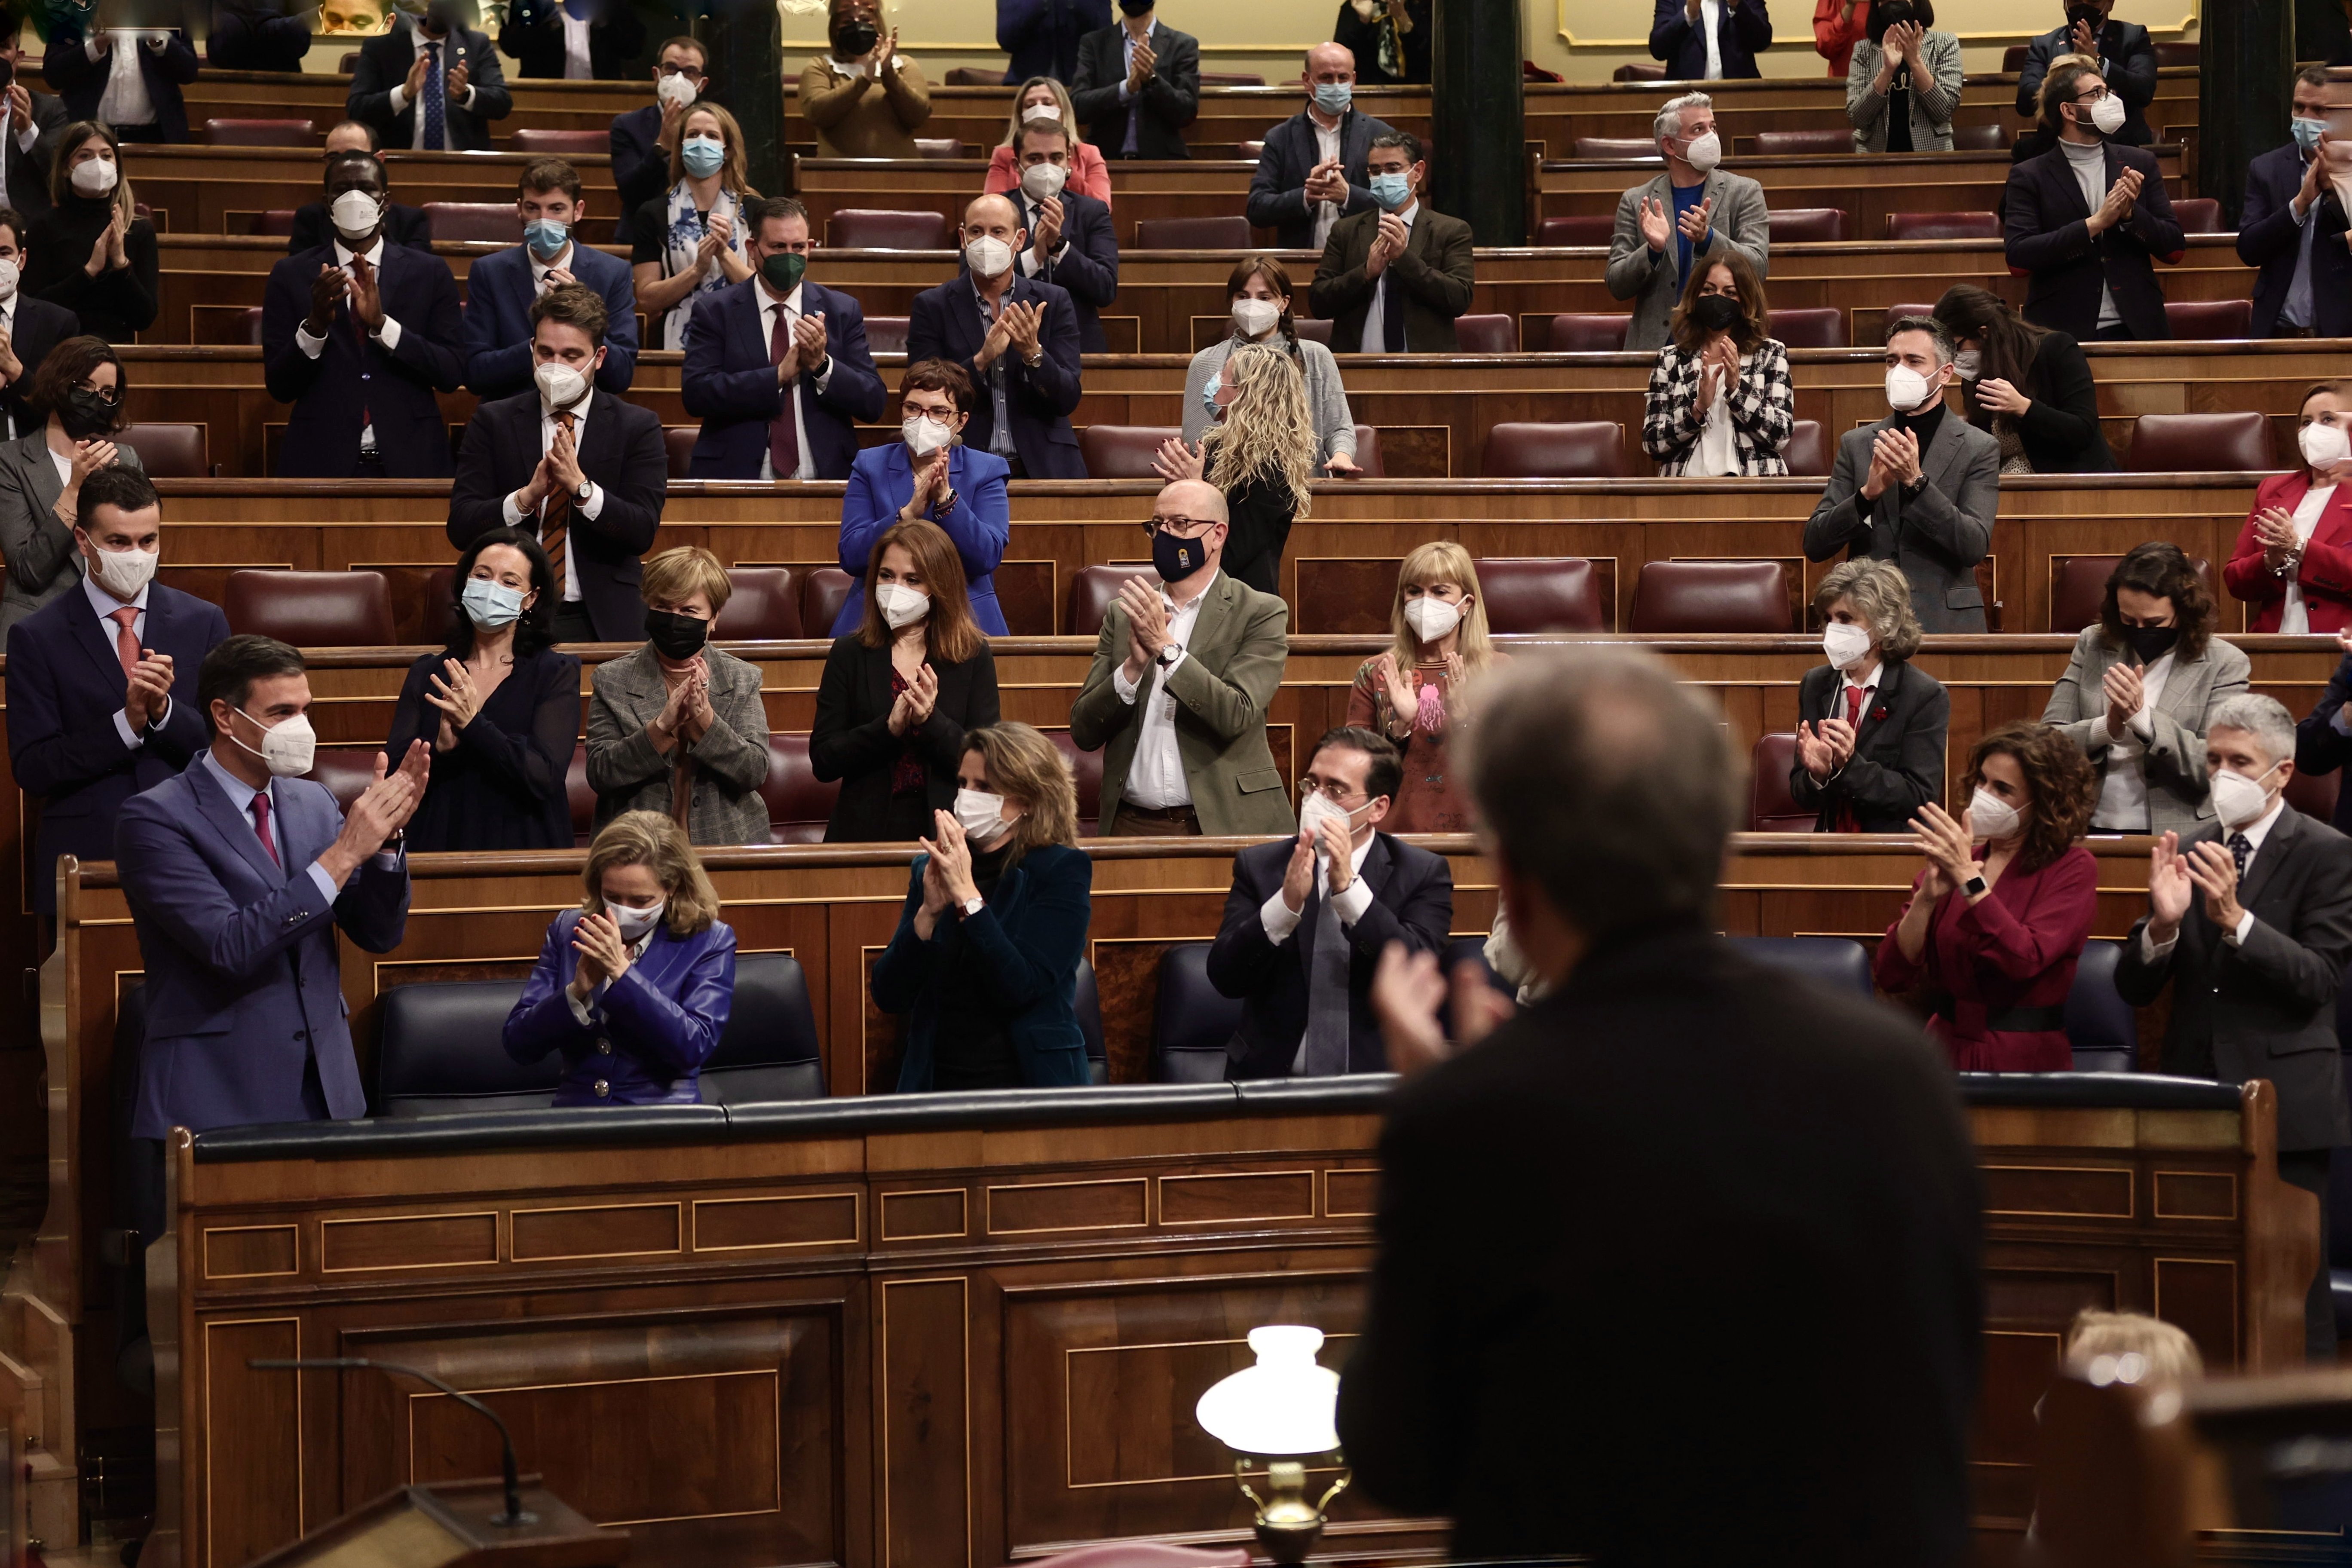 Spain is now a 'flawed democracy', according to 'The Economist's ranking